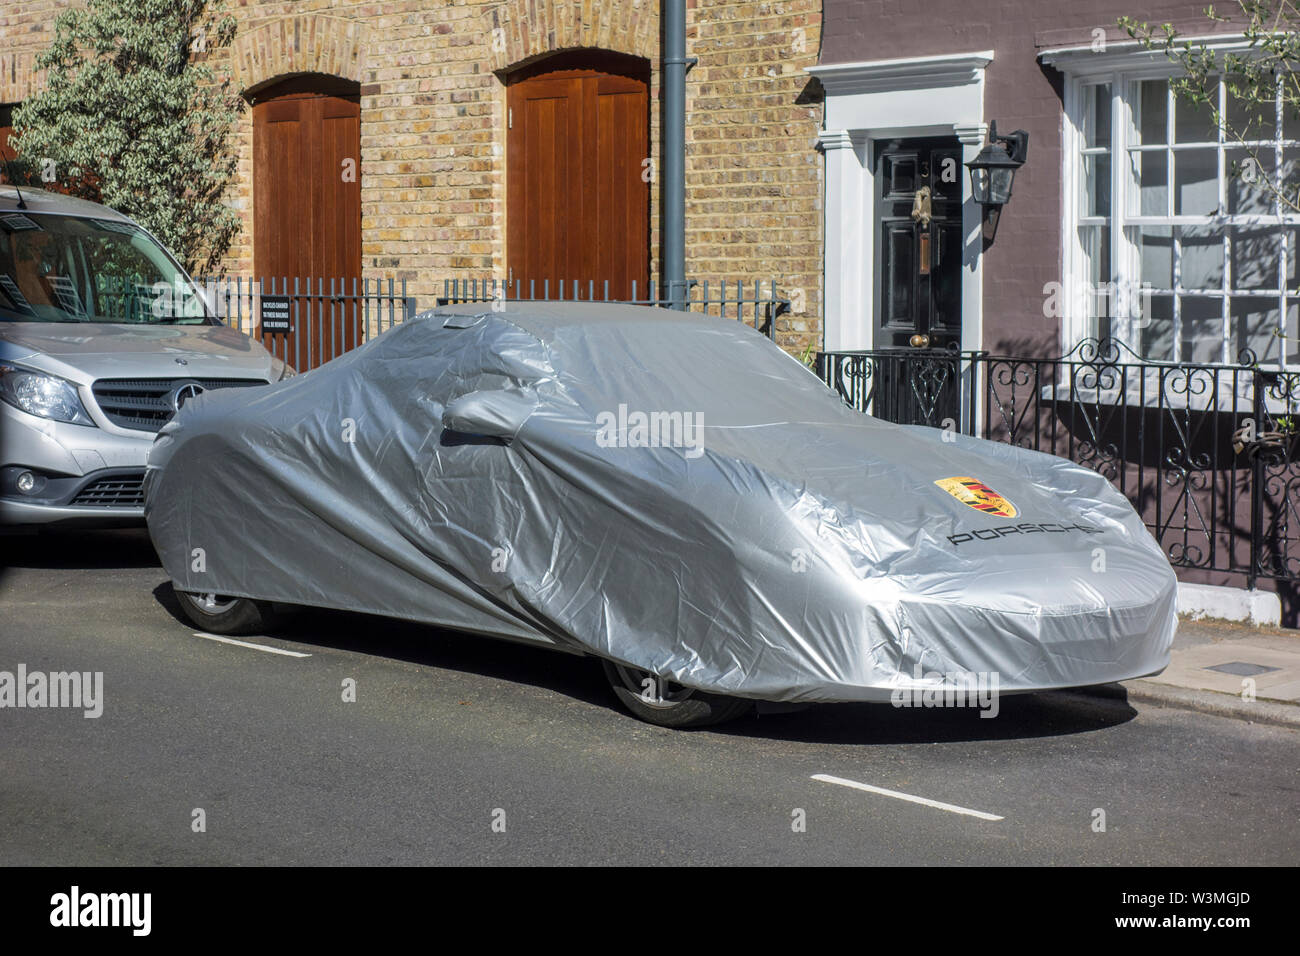 Porsche 911 car under a car cover parked on a road in Notting Hill